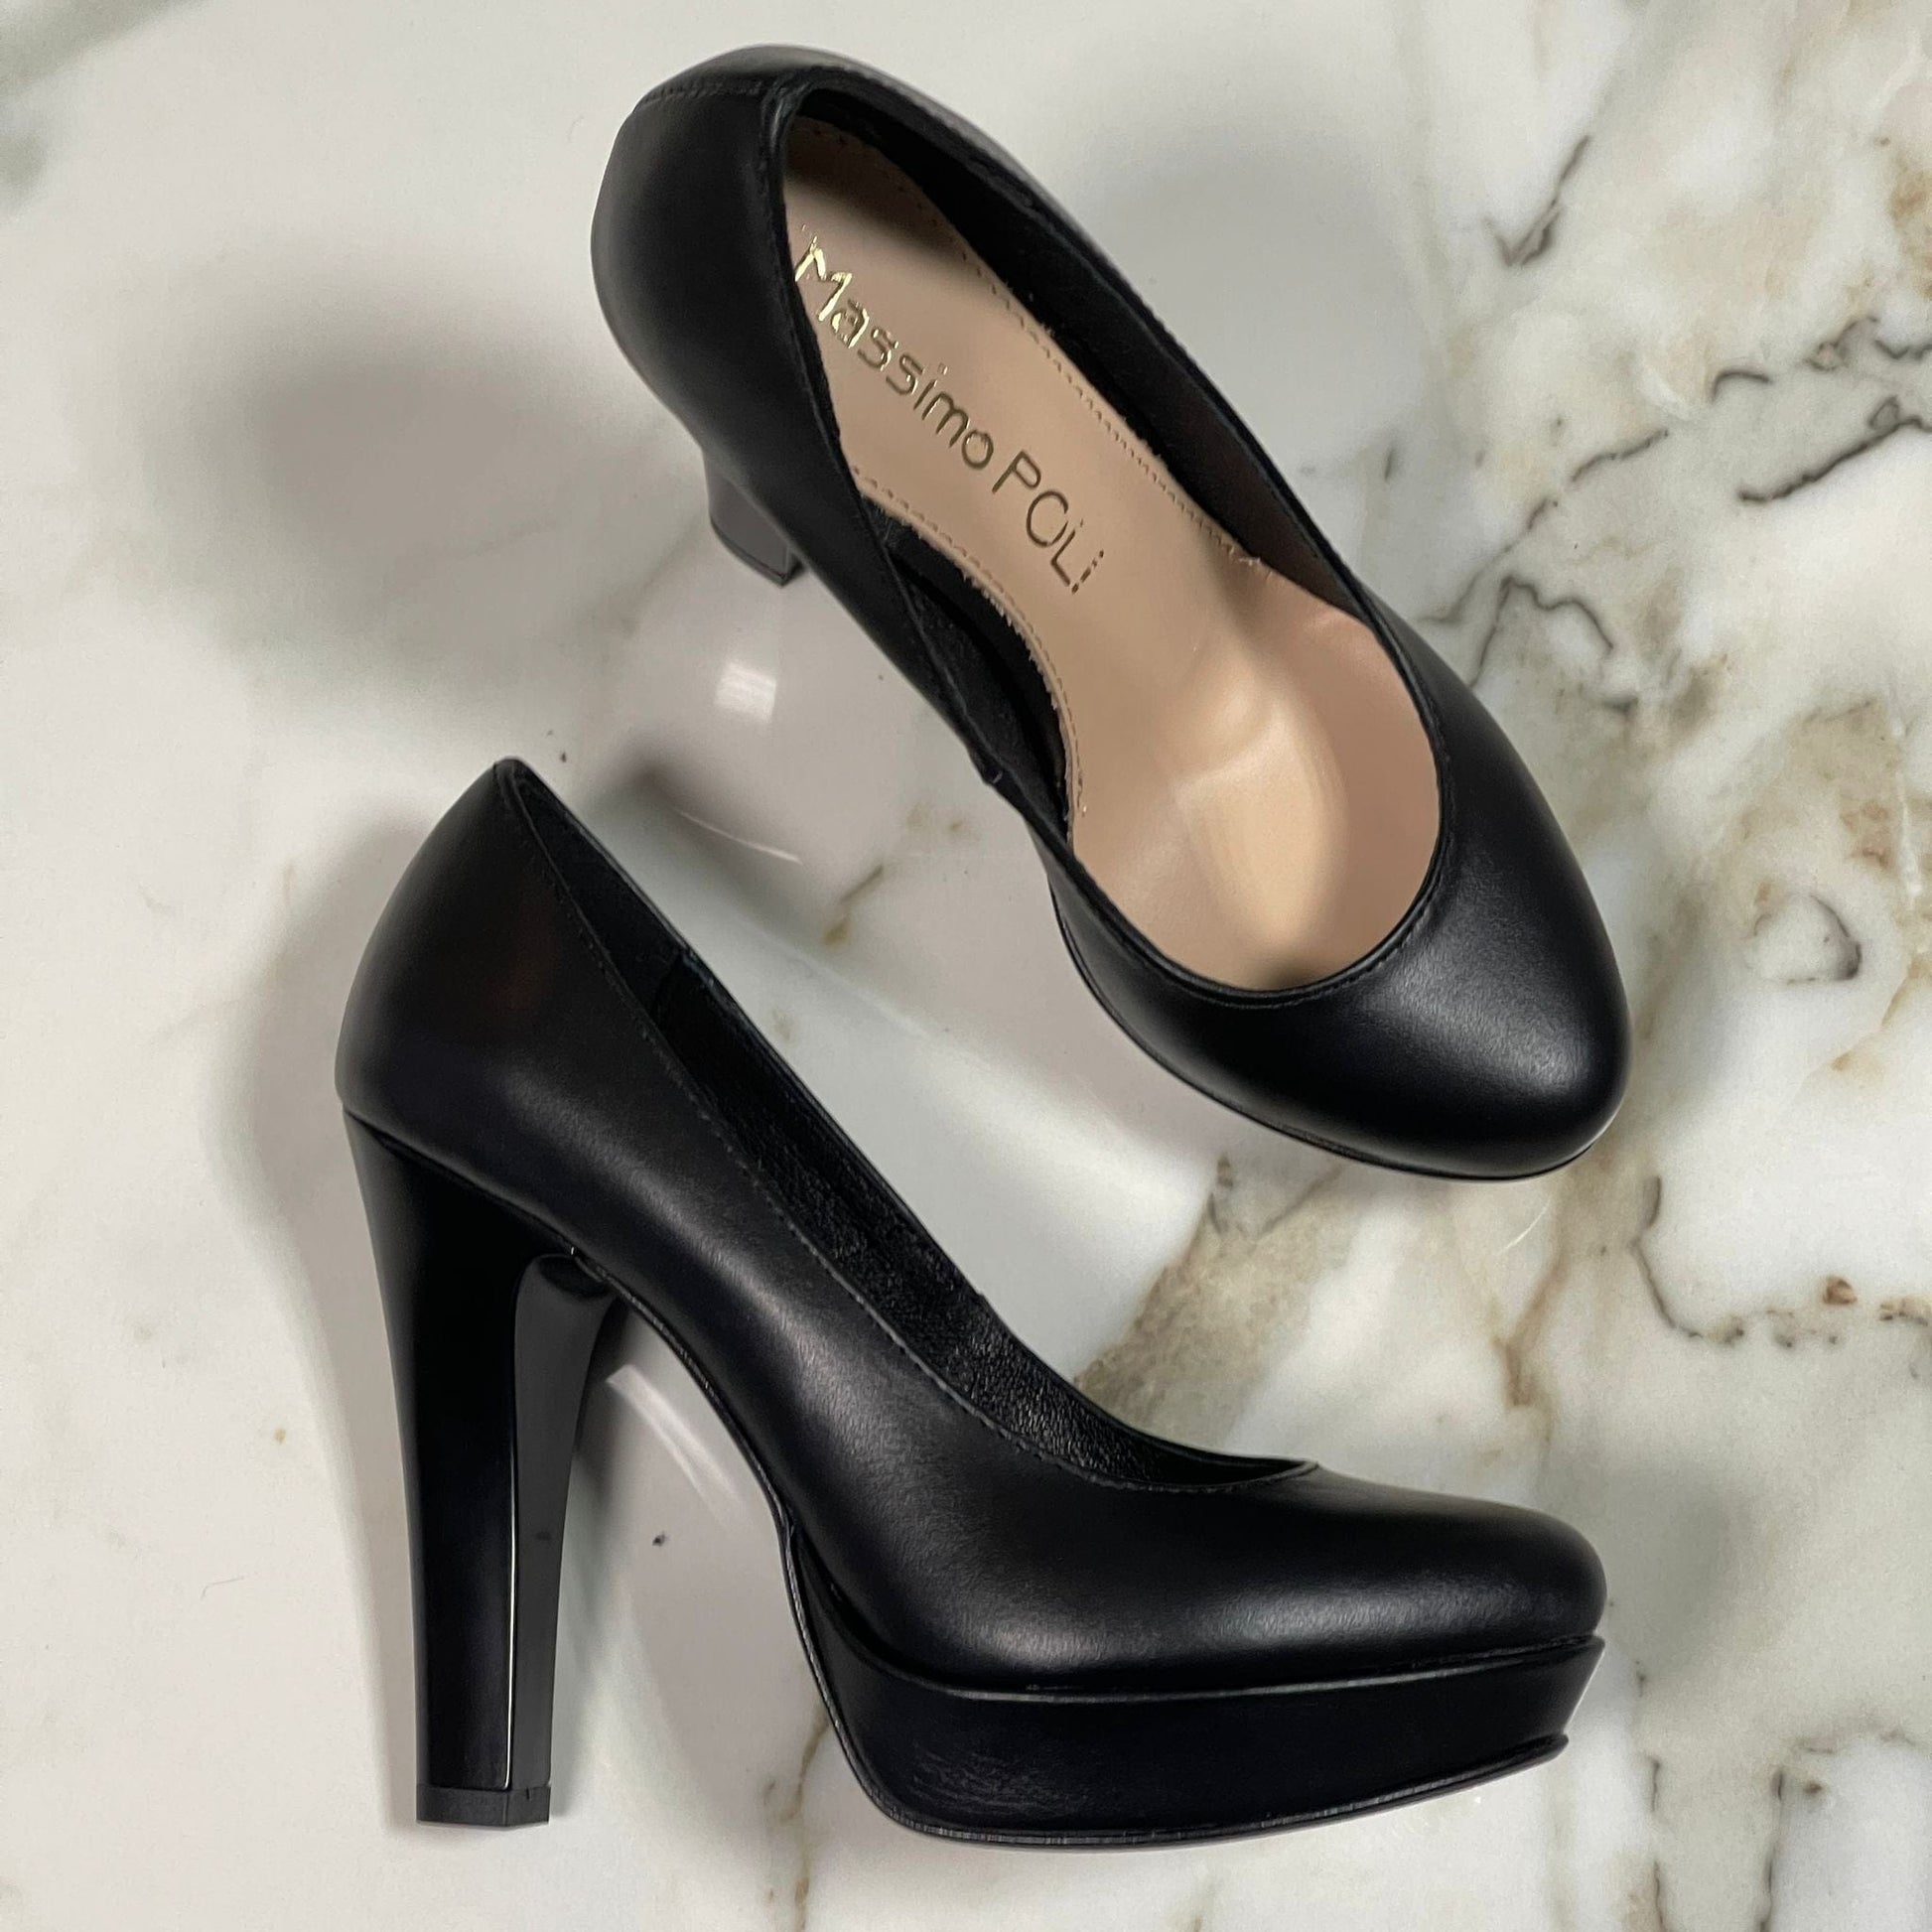 Almond toe high heel platform court shoes in black leather